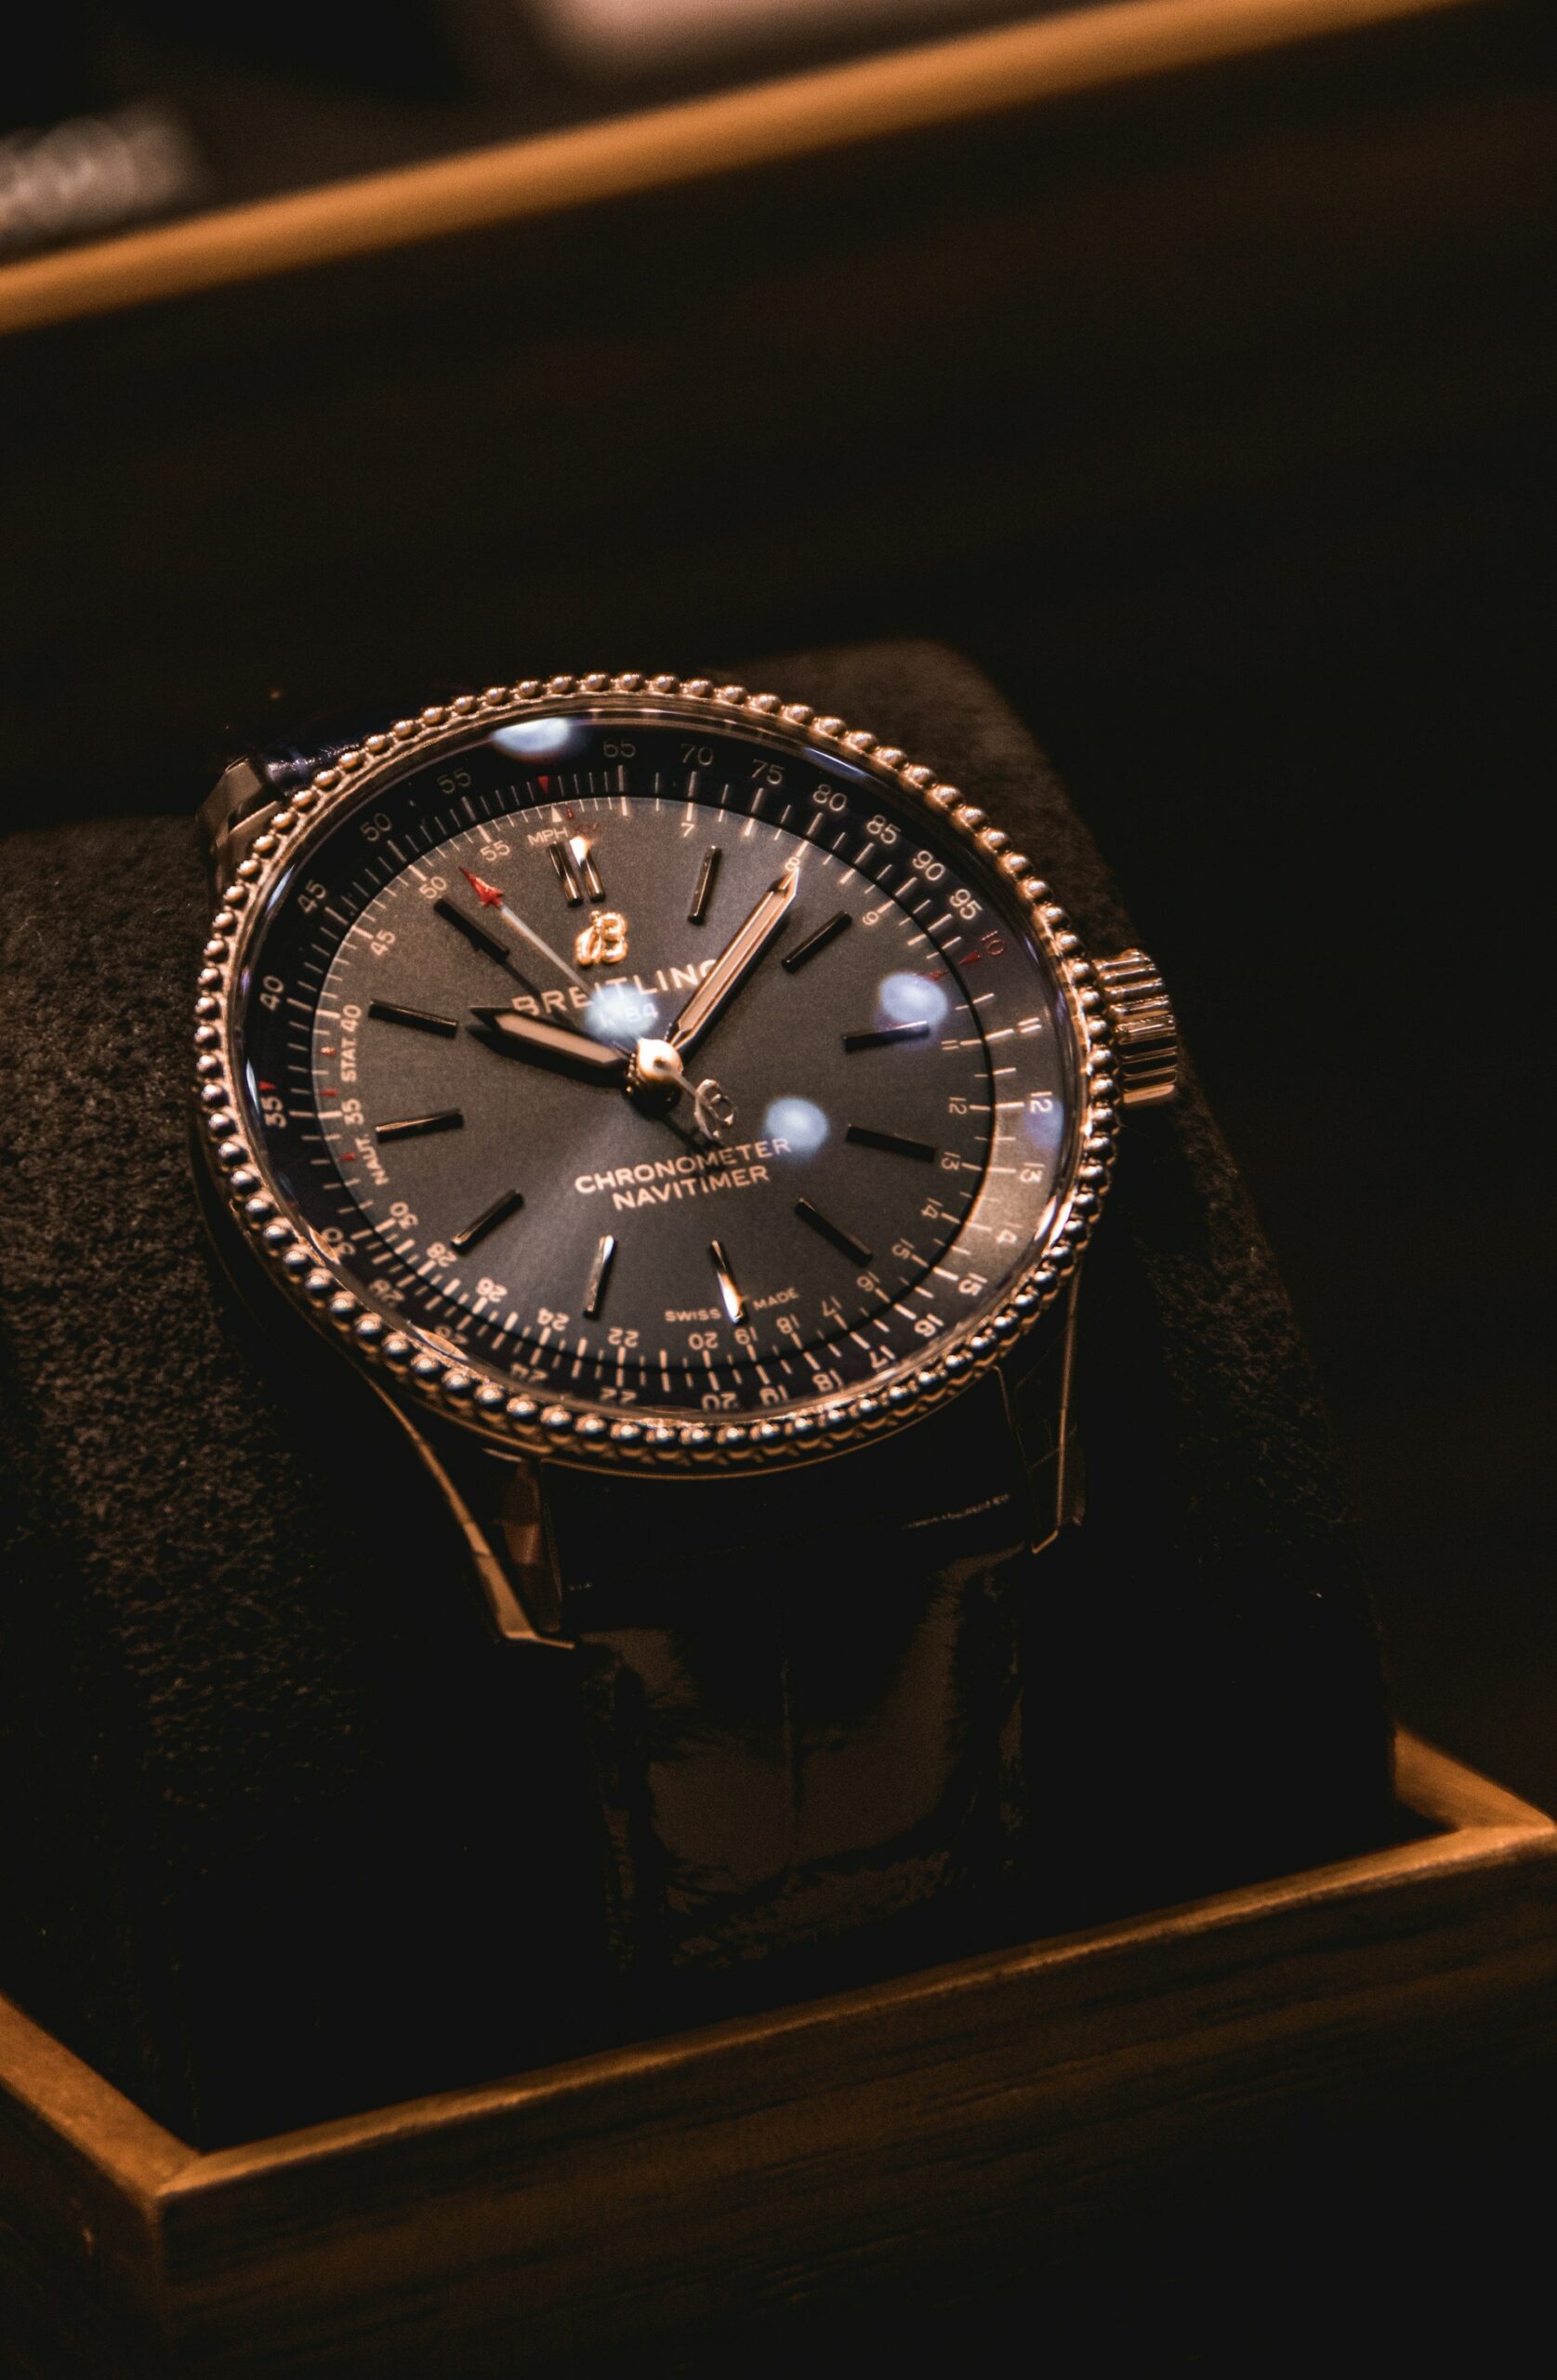 Why Watches Are Such a Popular Luxury Asset